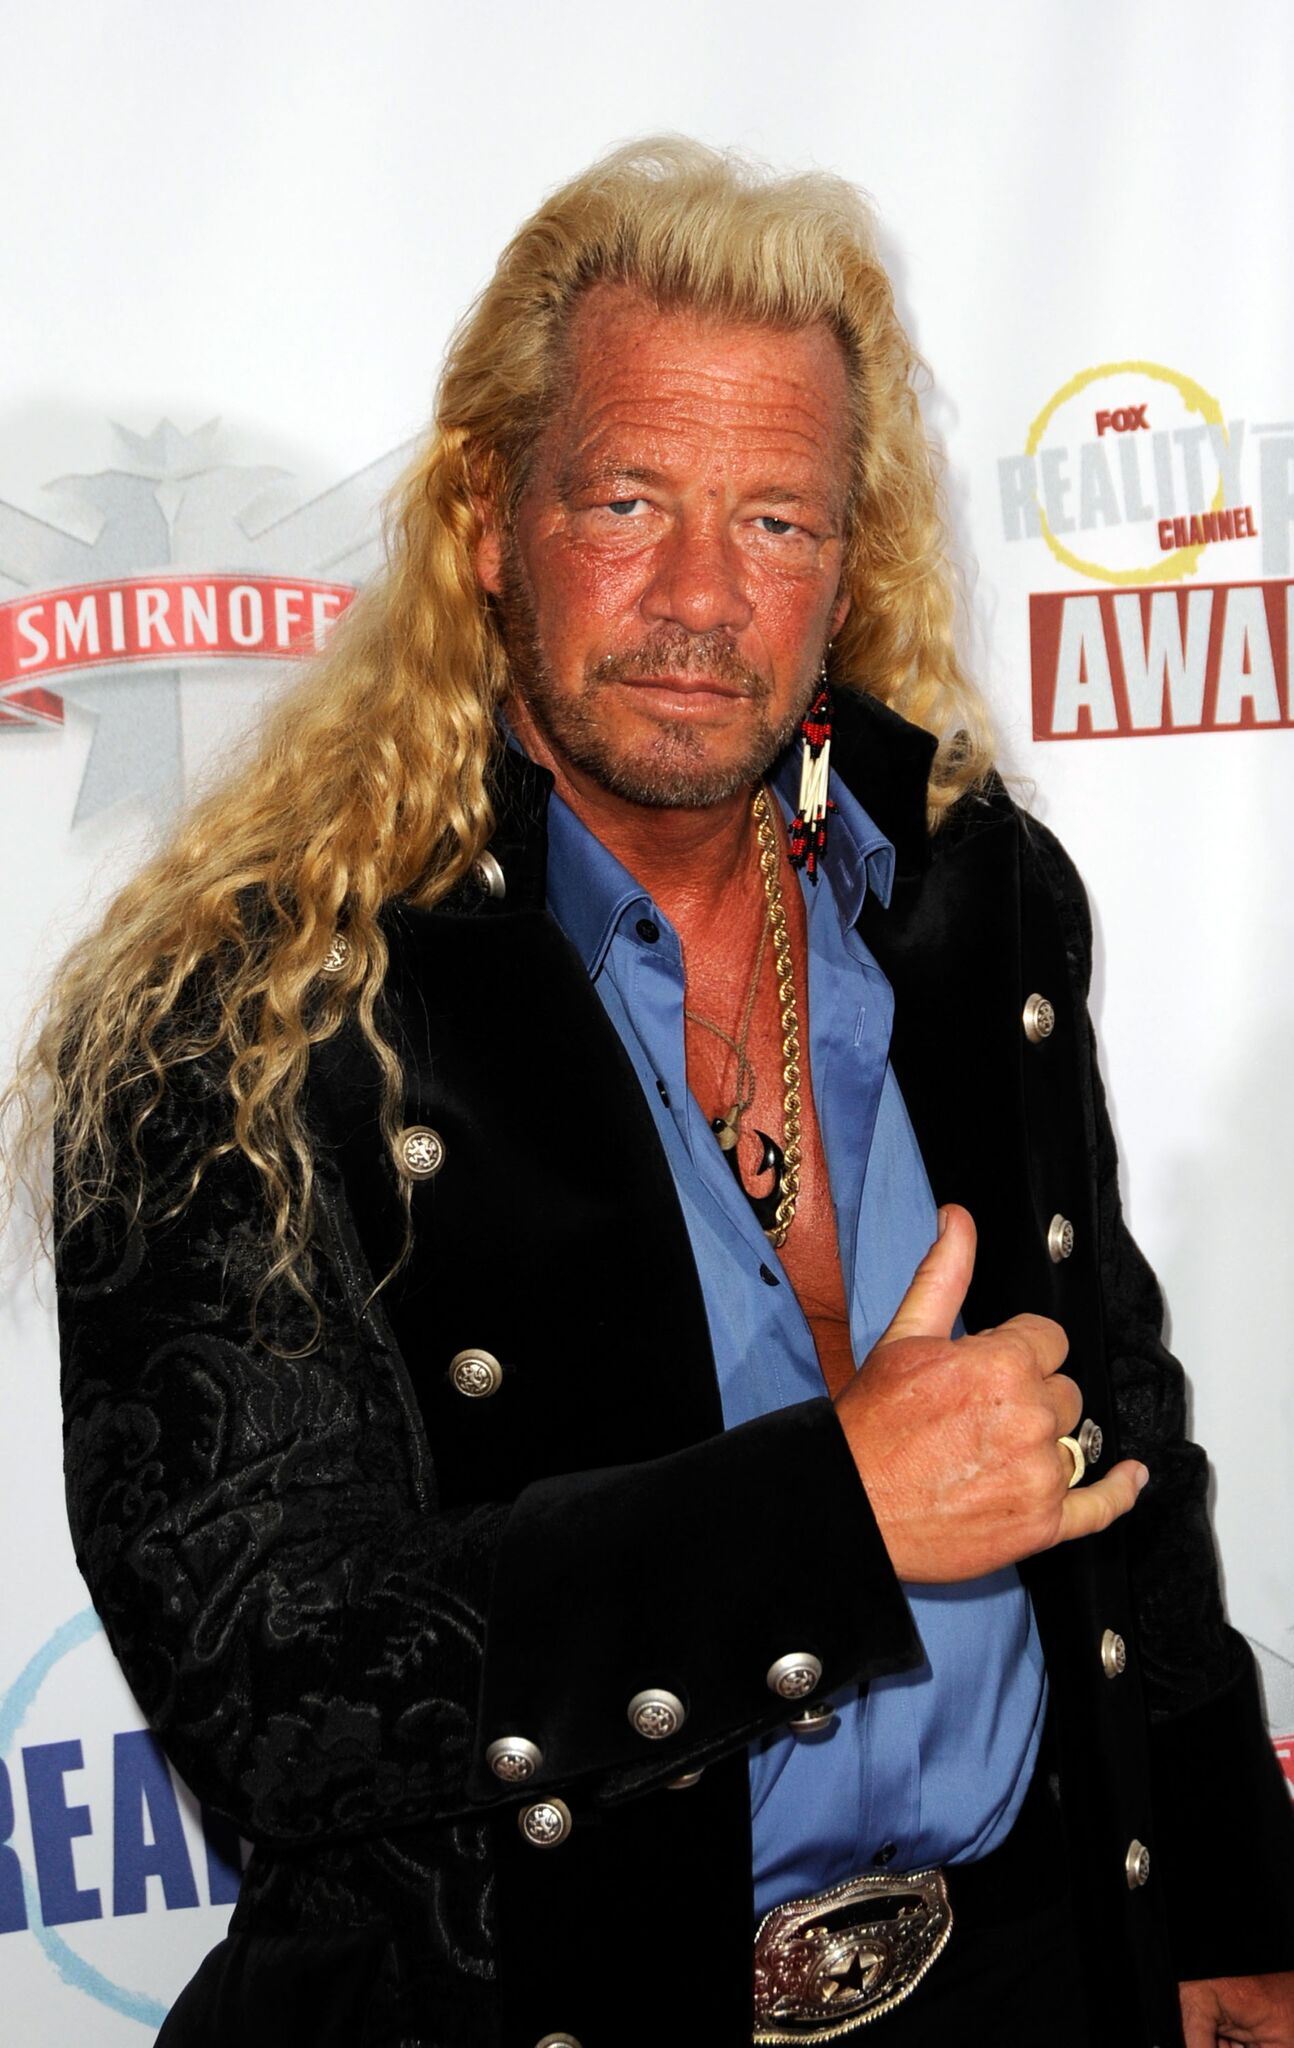 Duane "Dog" Chapman arrives at the Fox Reality Channel Really Awards | Getty Images